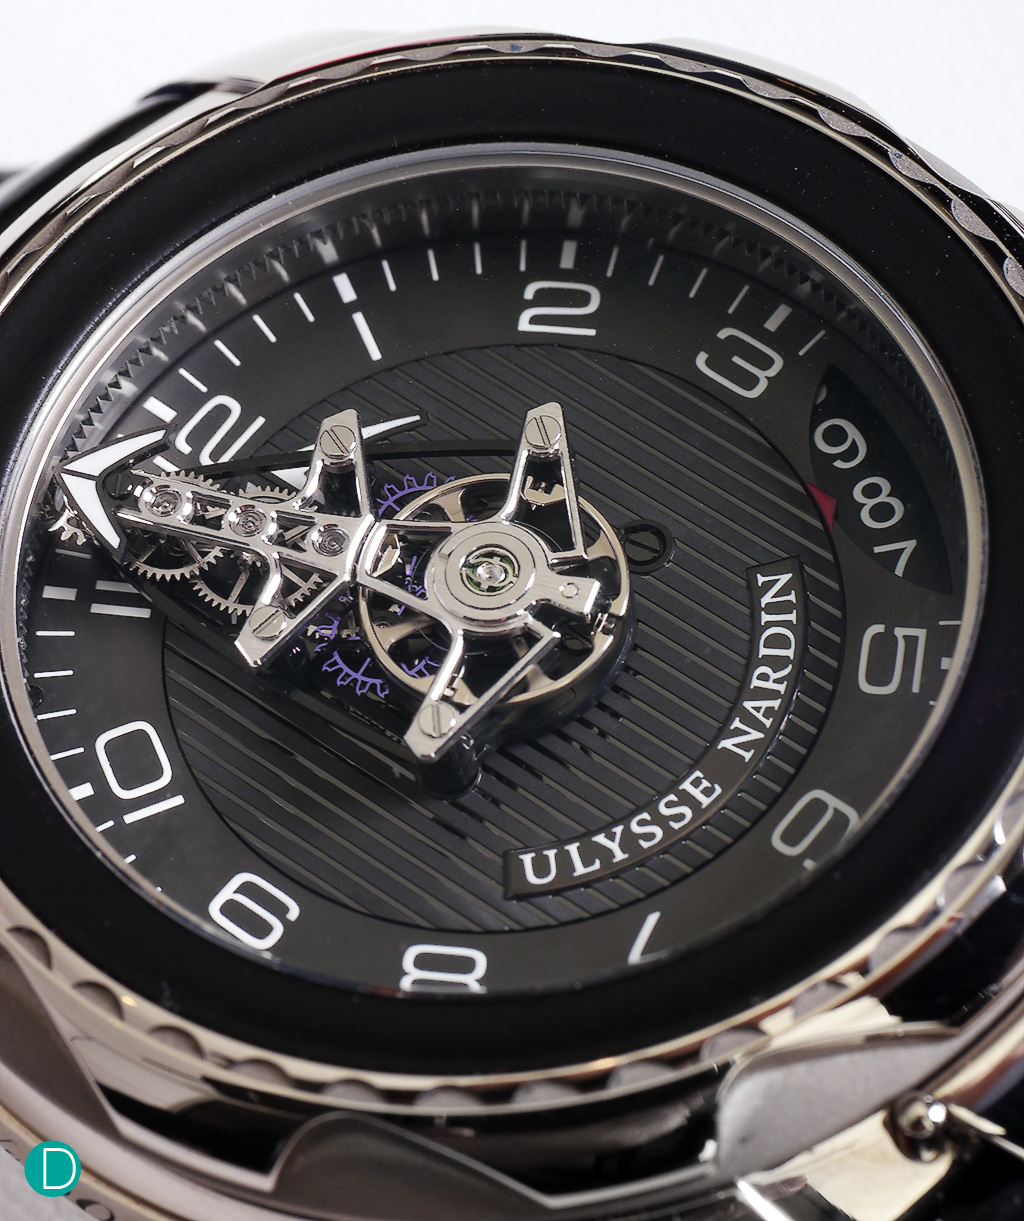 UN FreakLab, showing the dial and the redesigned floating movement which turns on its own axis. 